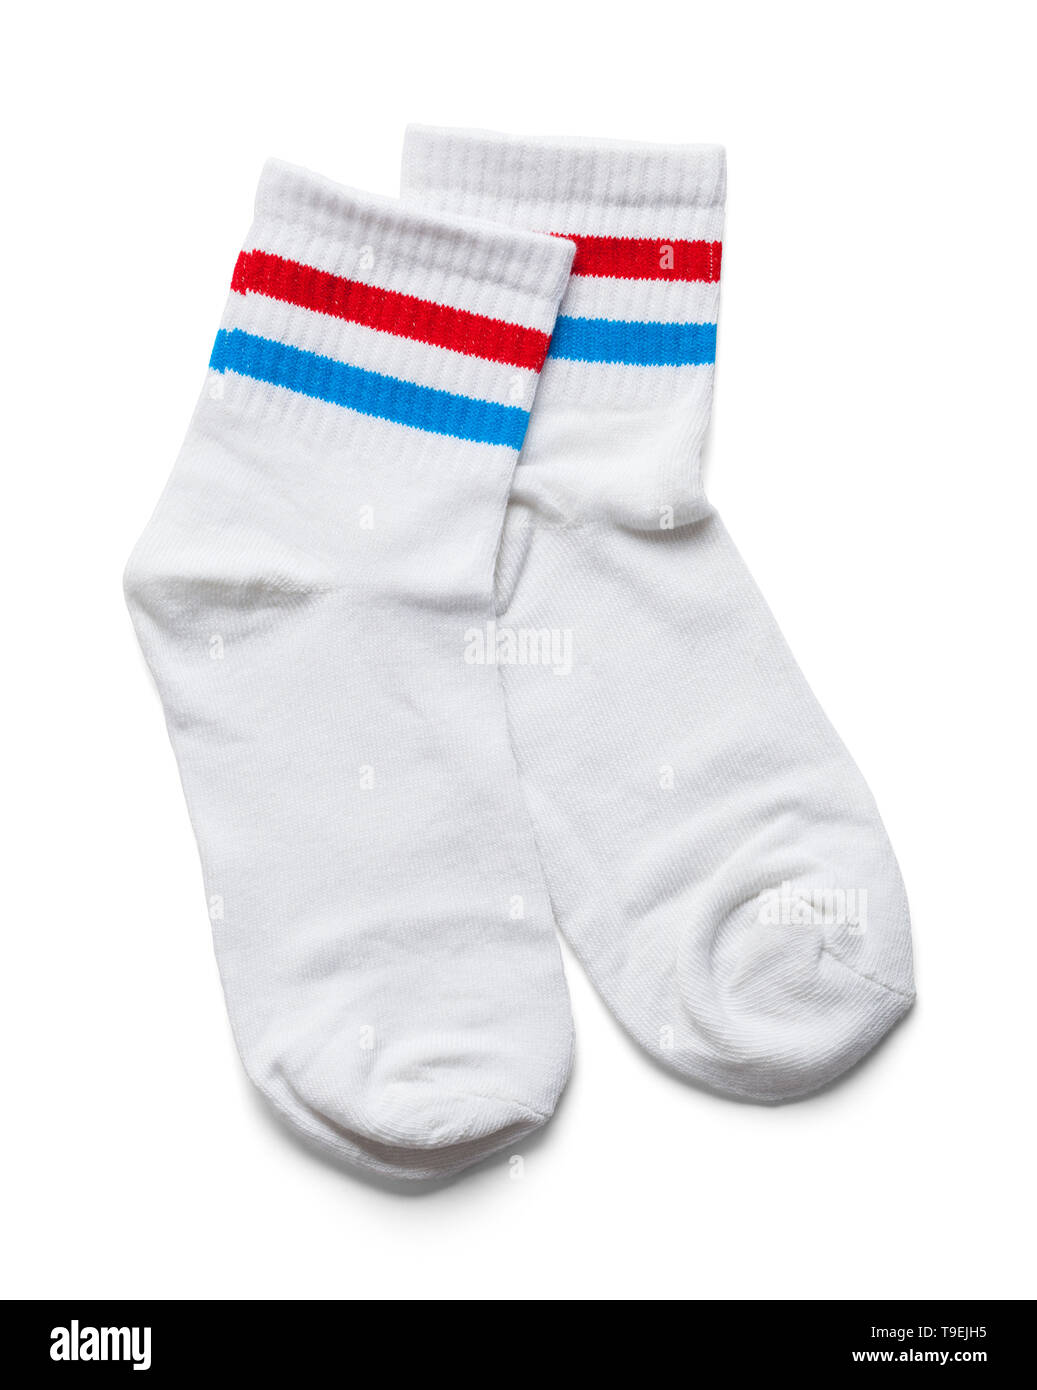 Pair of White Socks with Blue an Red Stripes Isolated on White. Stock Photo